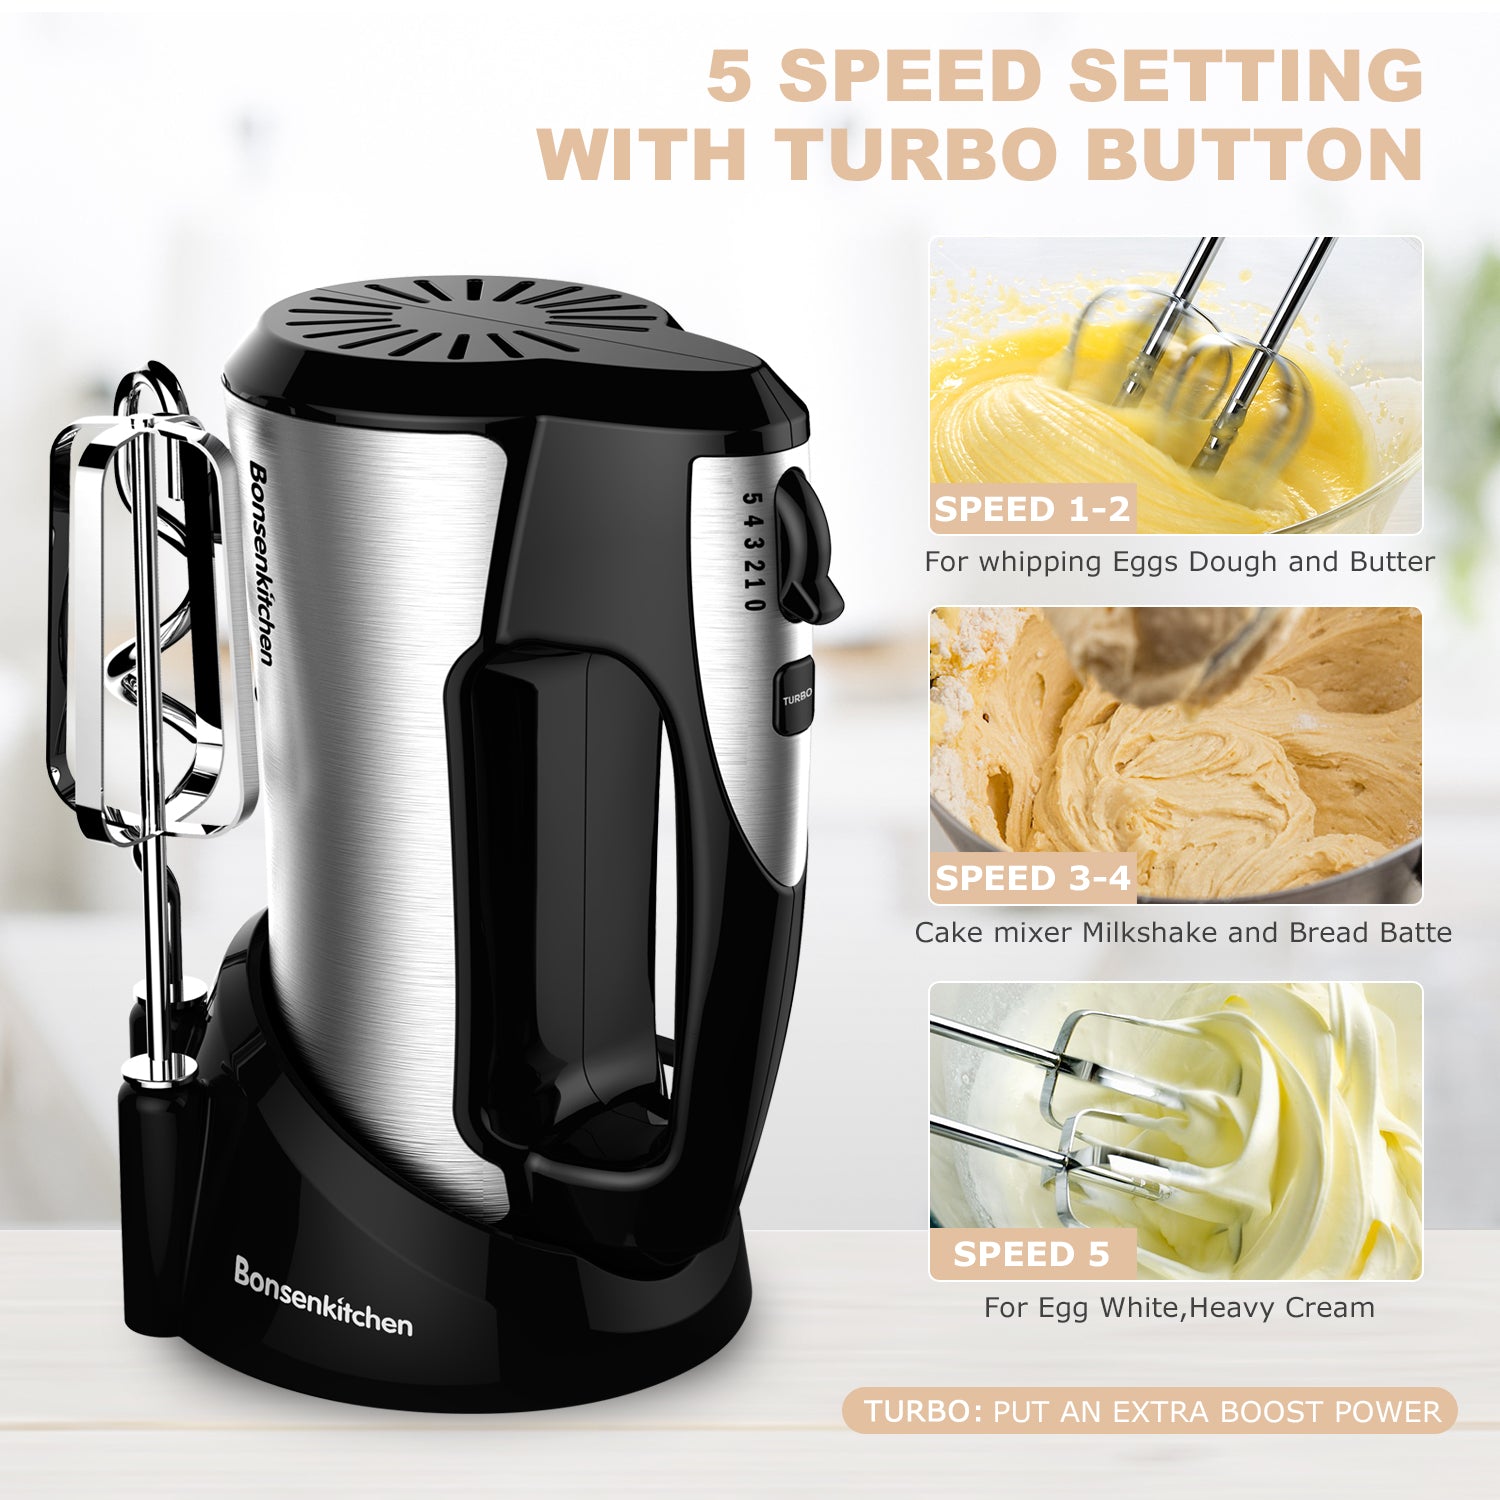  BAIGELONG Hand Electric Mixer, 300W Ultra Power Food Kitchen  Mixer with 5 Self-Control Speeds + Turbo Boost, 5 Stainless Steel  Attachments Handheld Mixer for Baking, White: Home & Kitchen